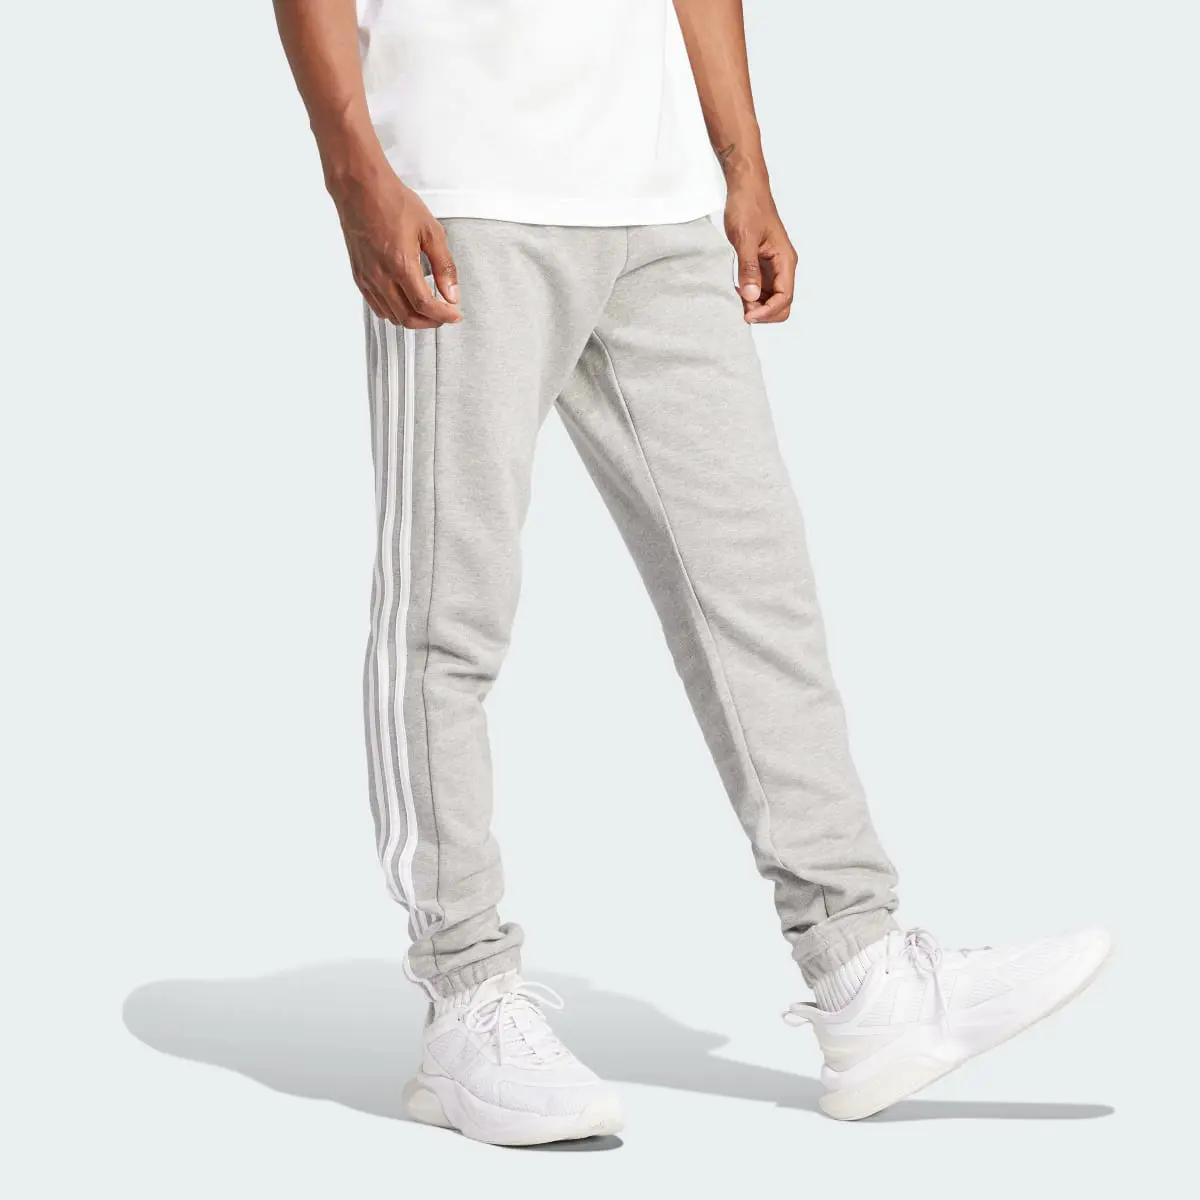 Adidas Essentials French Terry Tapered Elastic Cuff 3-Stripes Joggers. 2